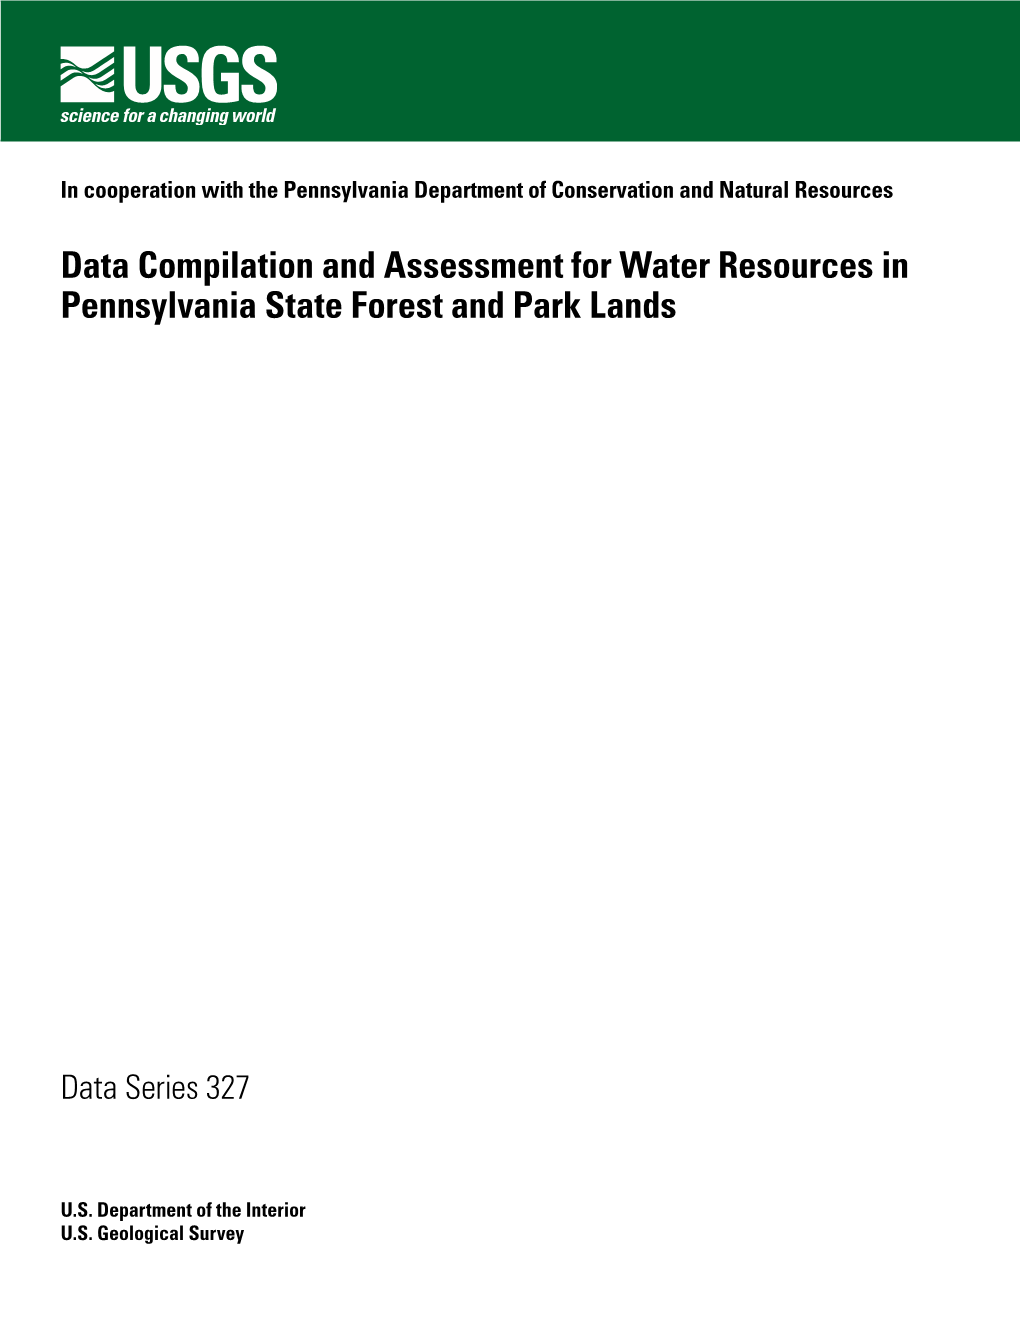 Data Compilation and Assessment for Water Resources in Pennsylvania State Forest and Park Lands